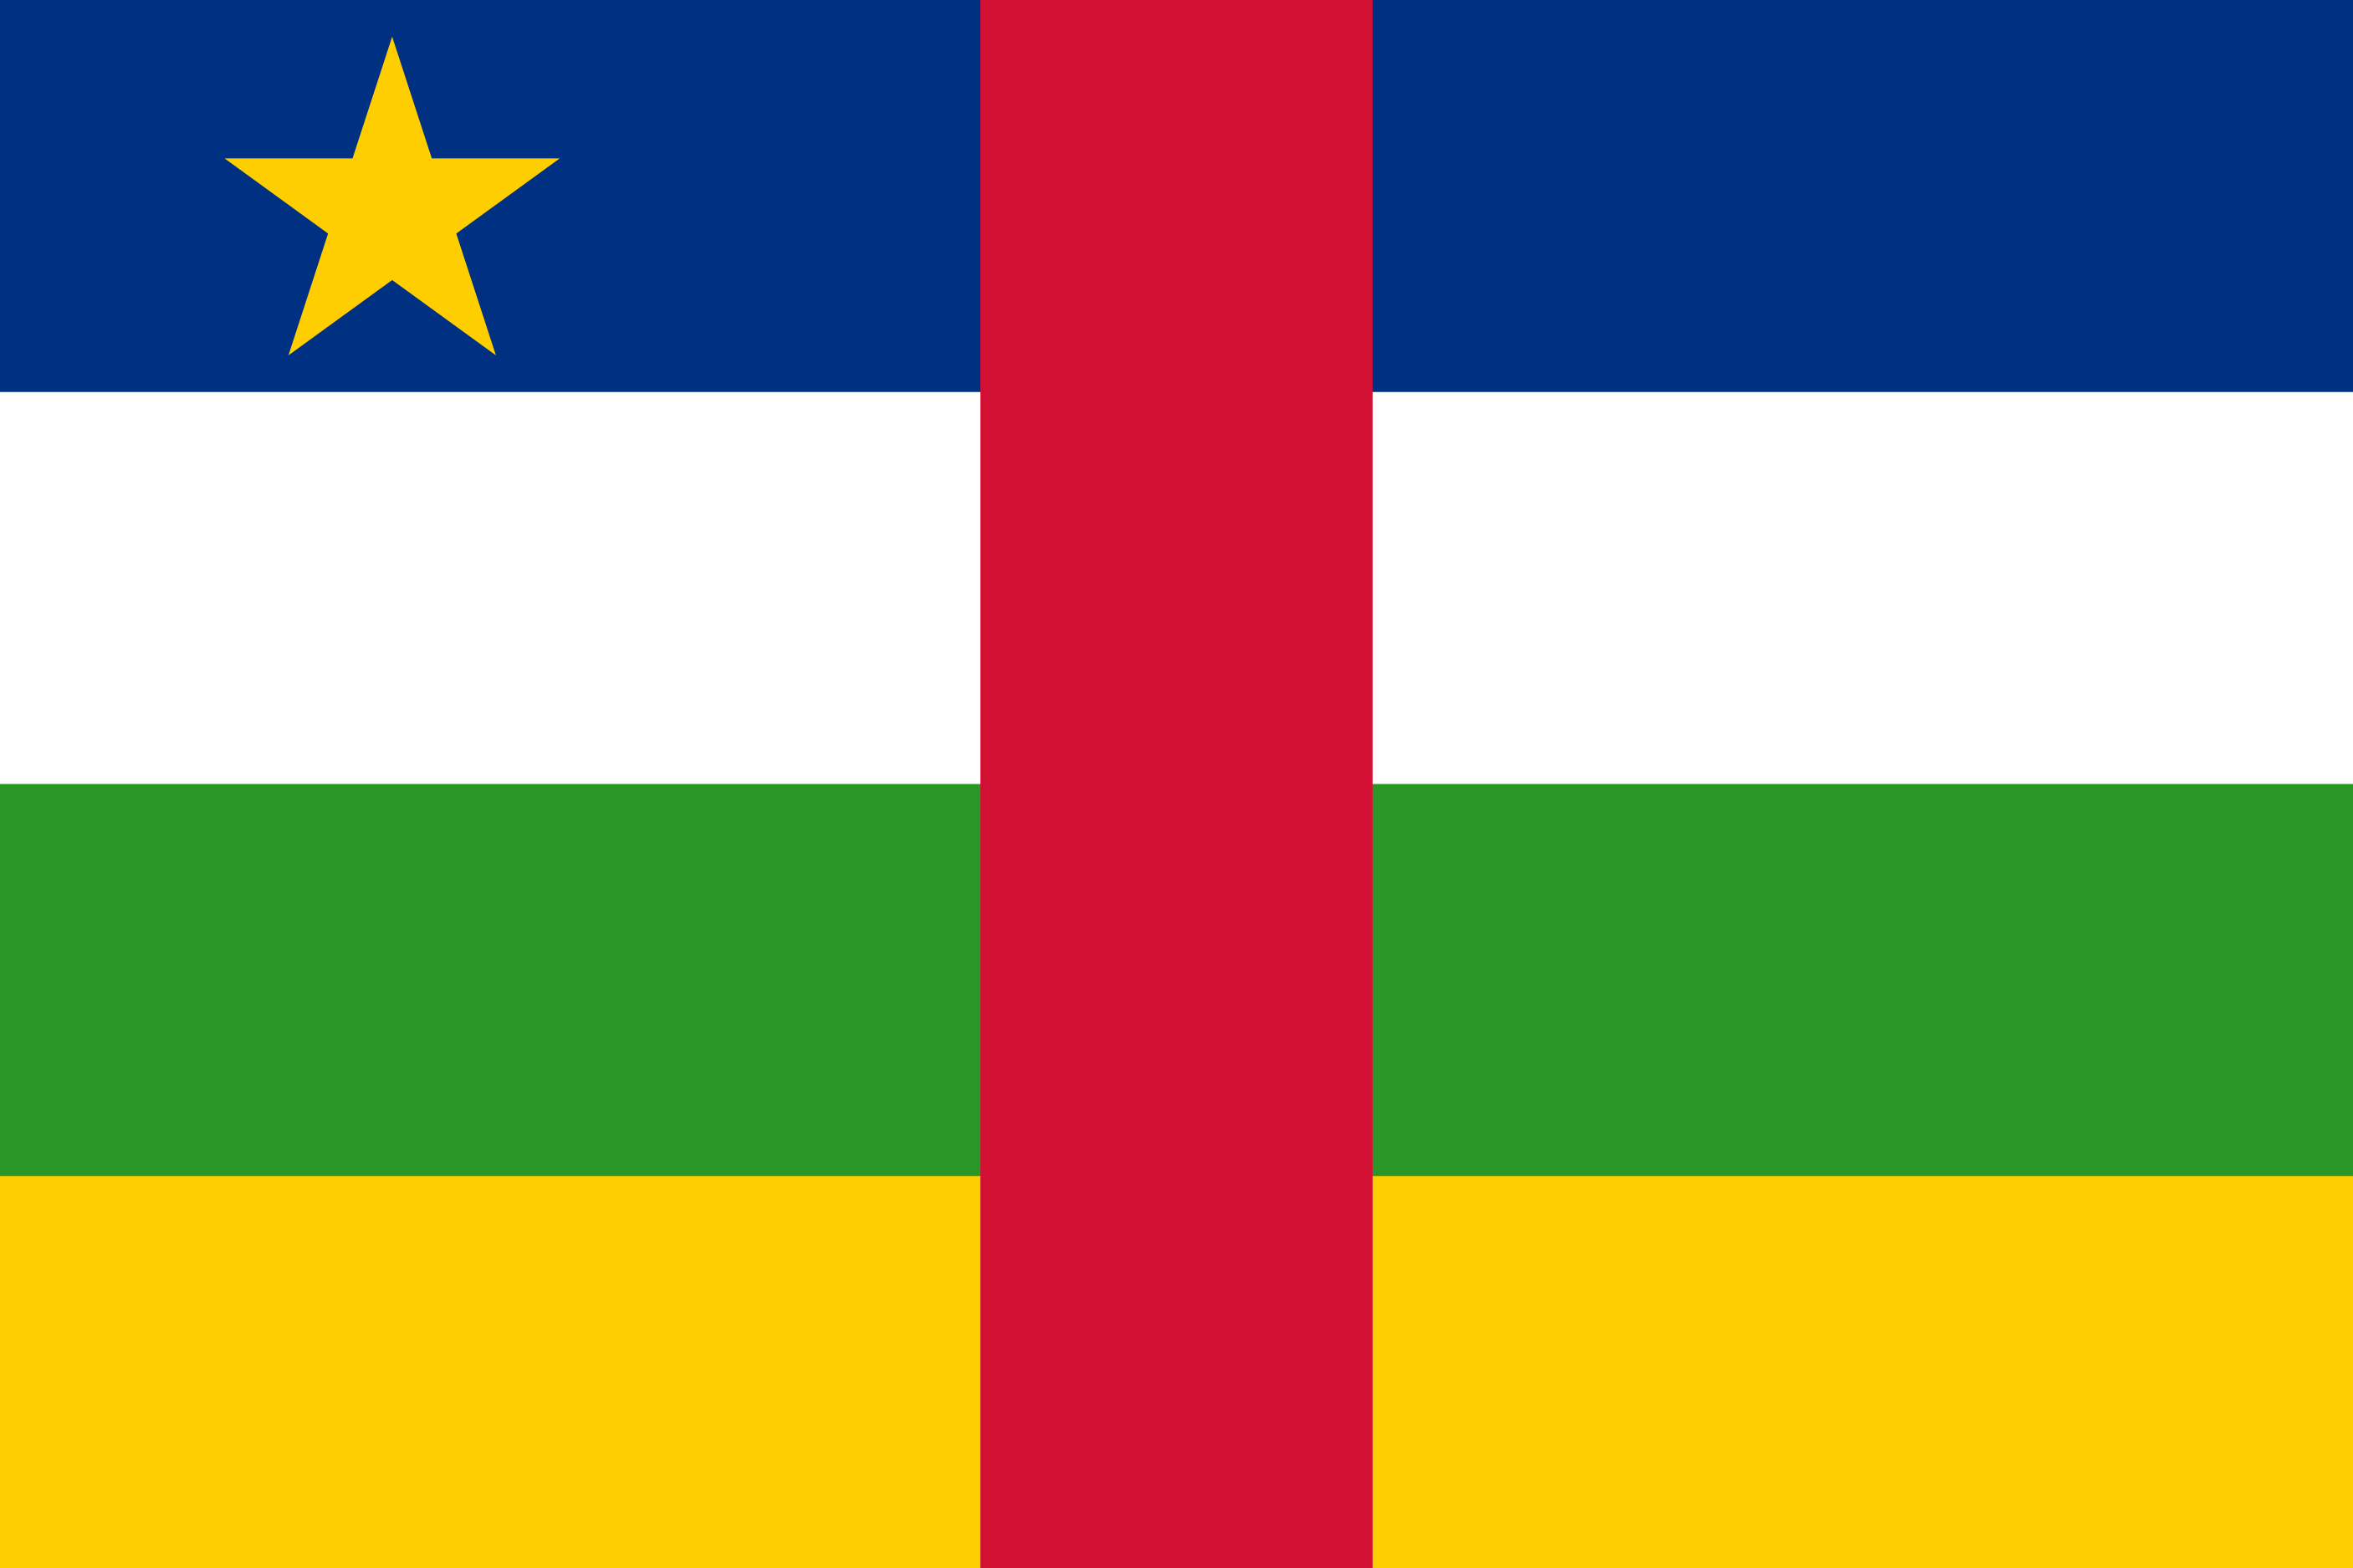 The Central African Republic Flag Image - Free Download